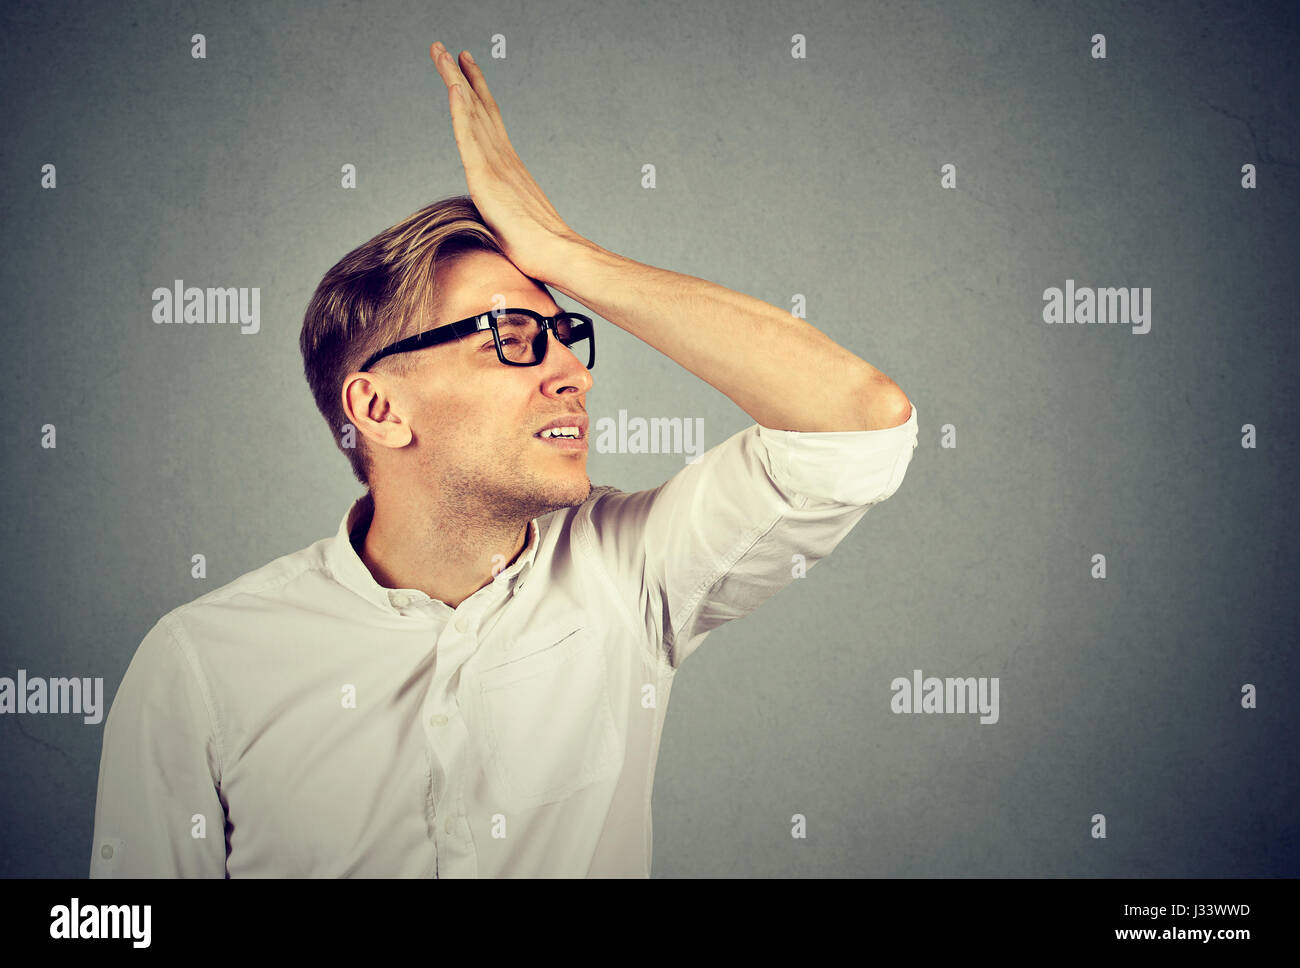 Regrets wrong doing. Silly young man in glasses slapping hand on head having a duh moment. Negative human emotion facial expression feeling, reaction Stock Photo